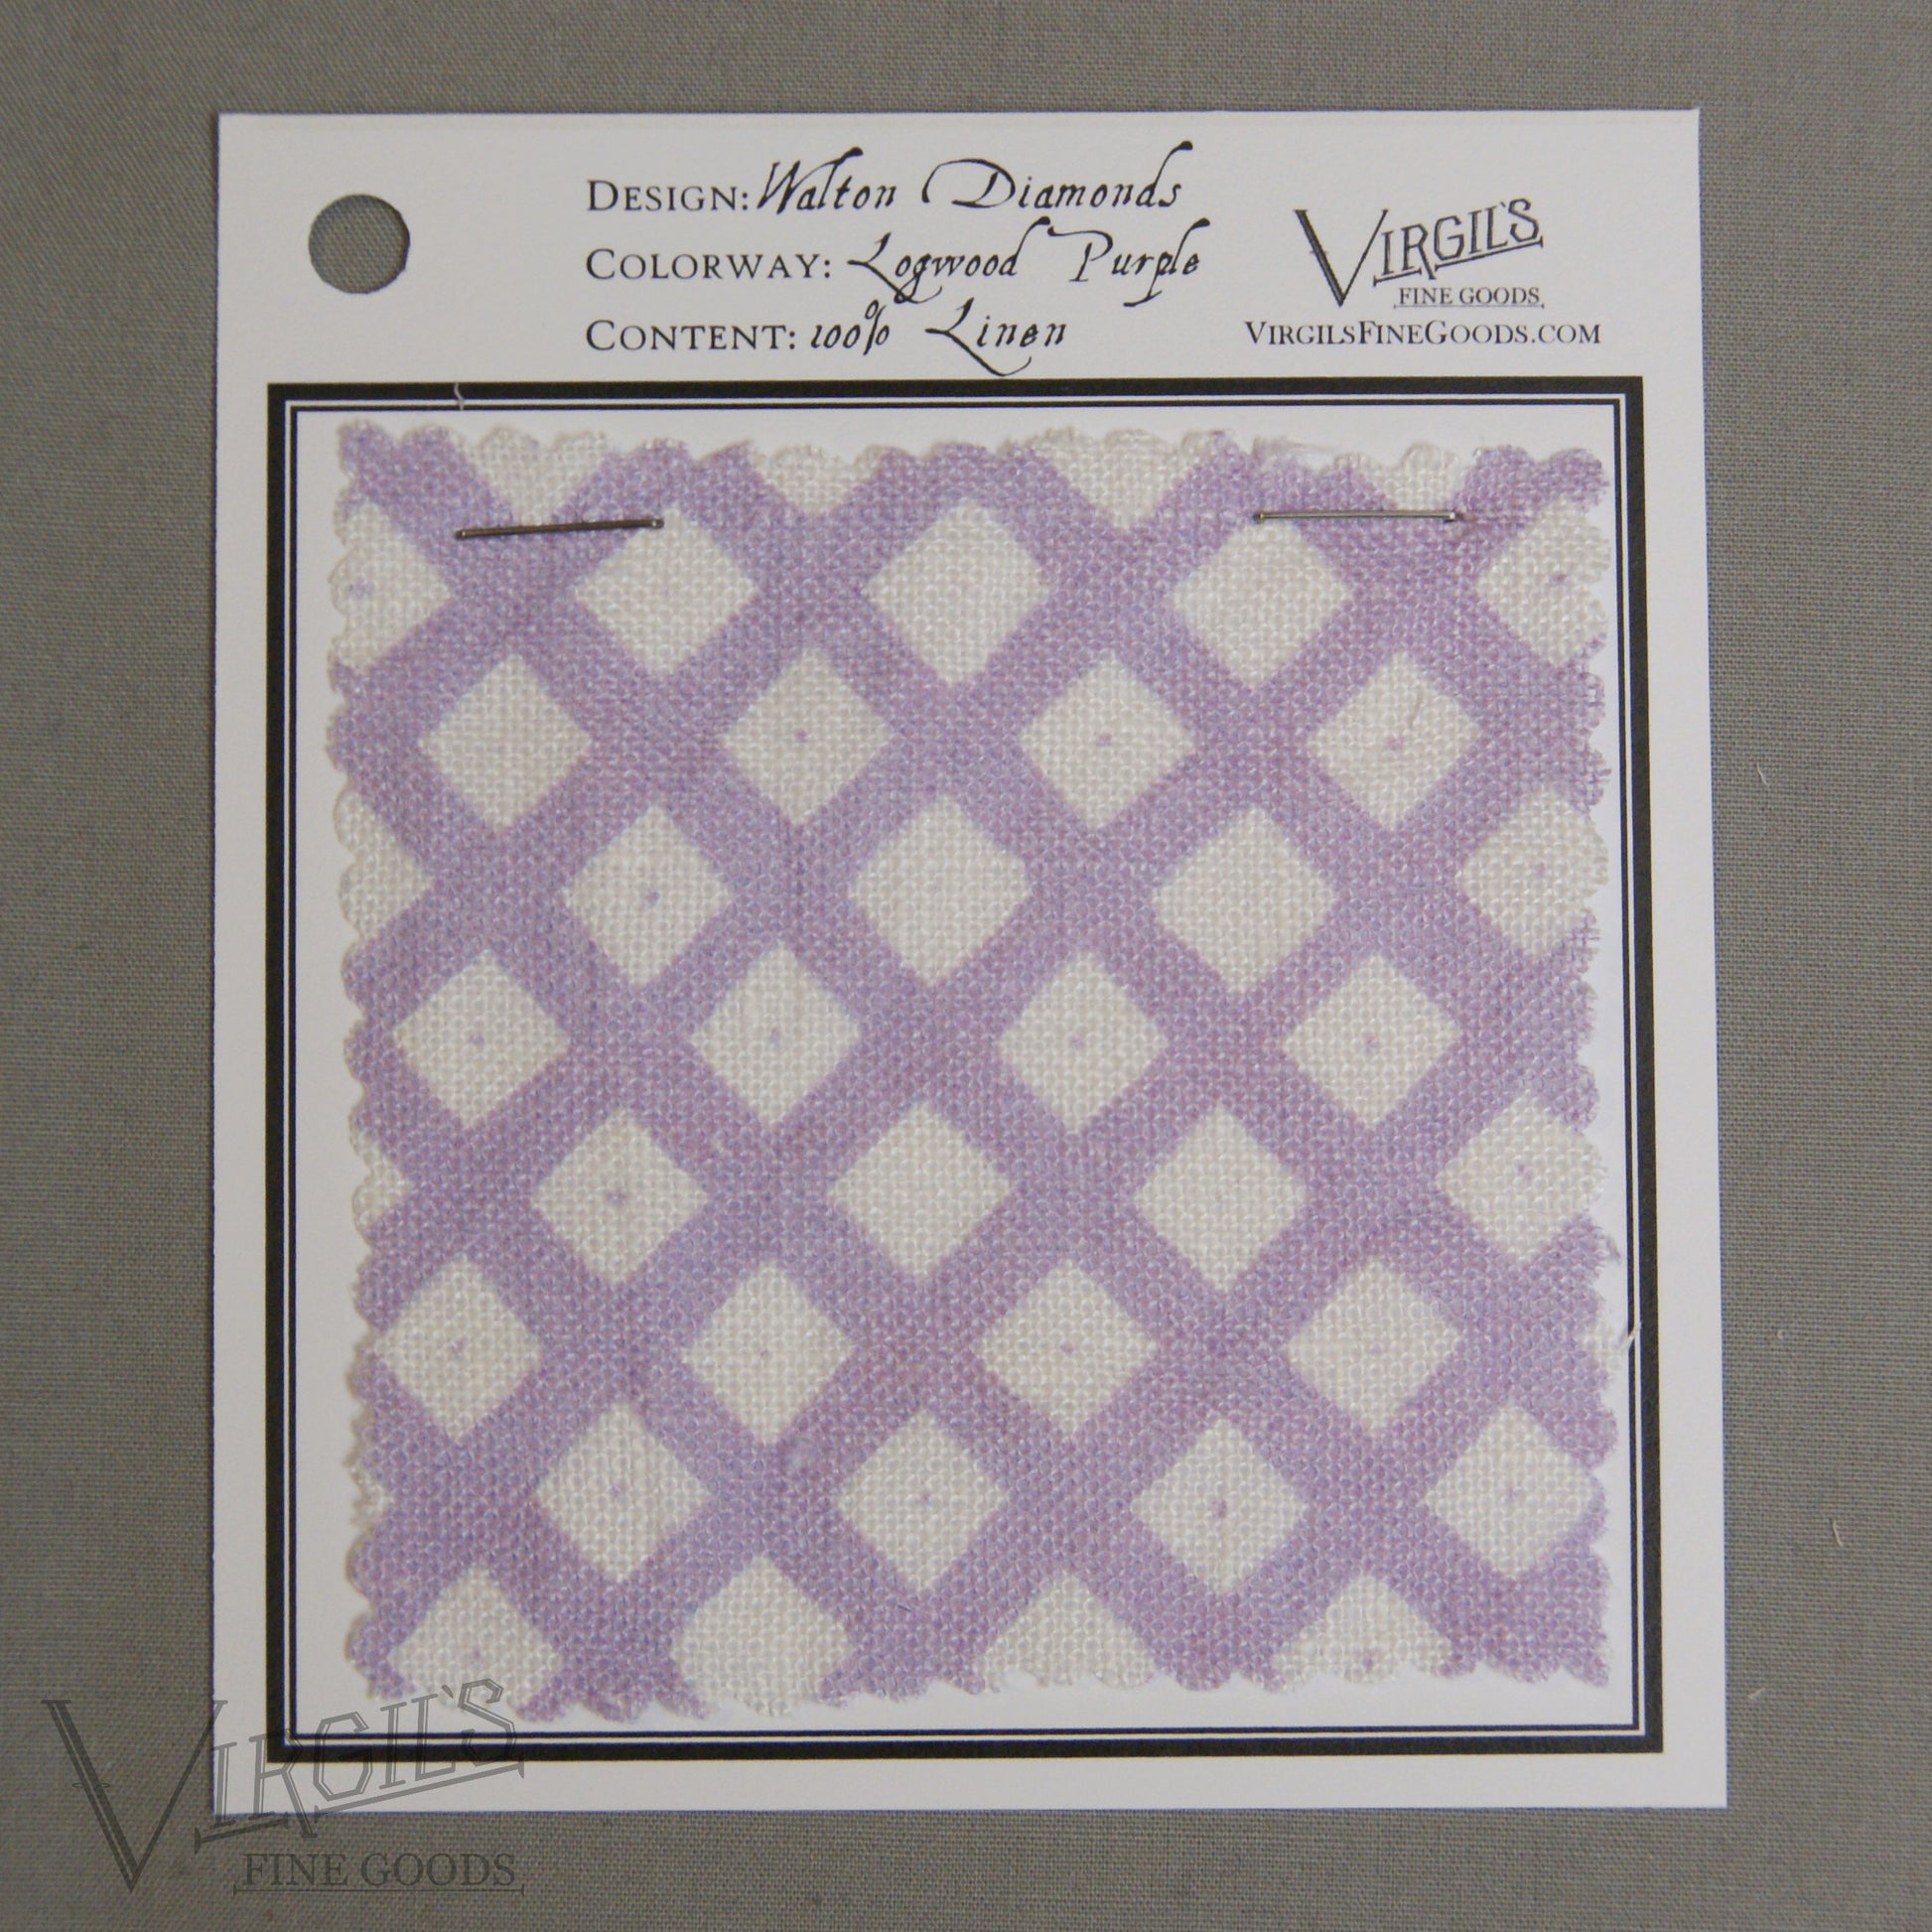 Historical Reproduction Fabric Swatches